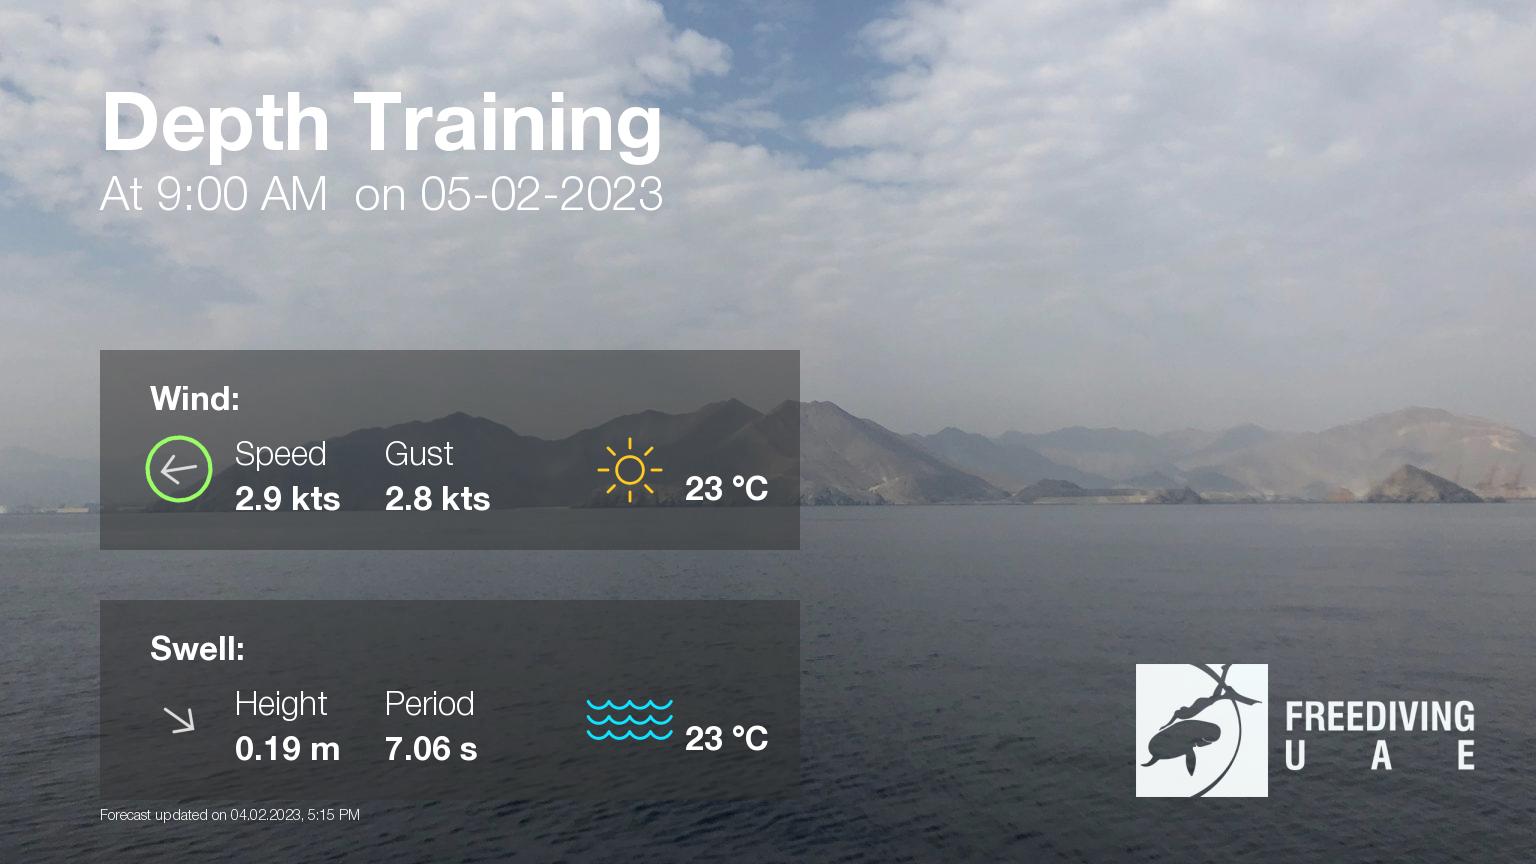 Expected weather during Depth Training on Sun, Feb 5, at 9:00 AM